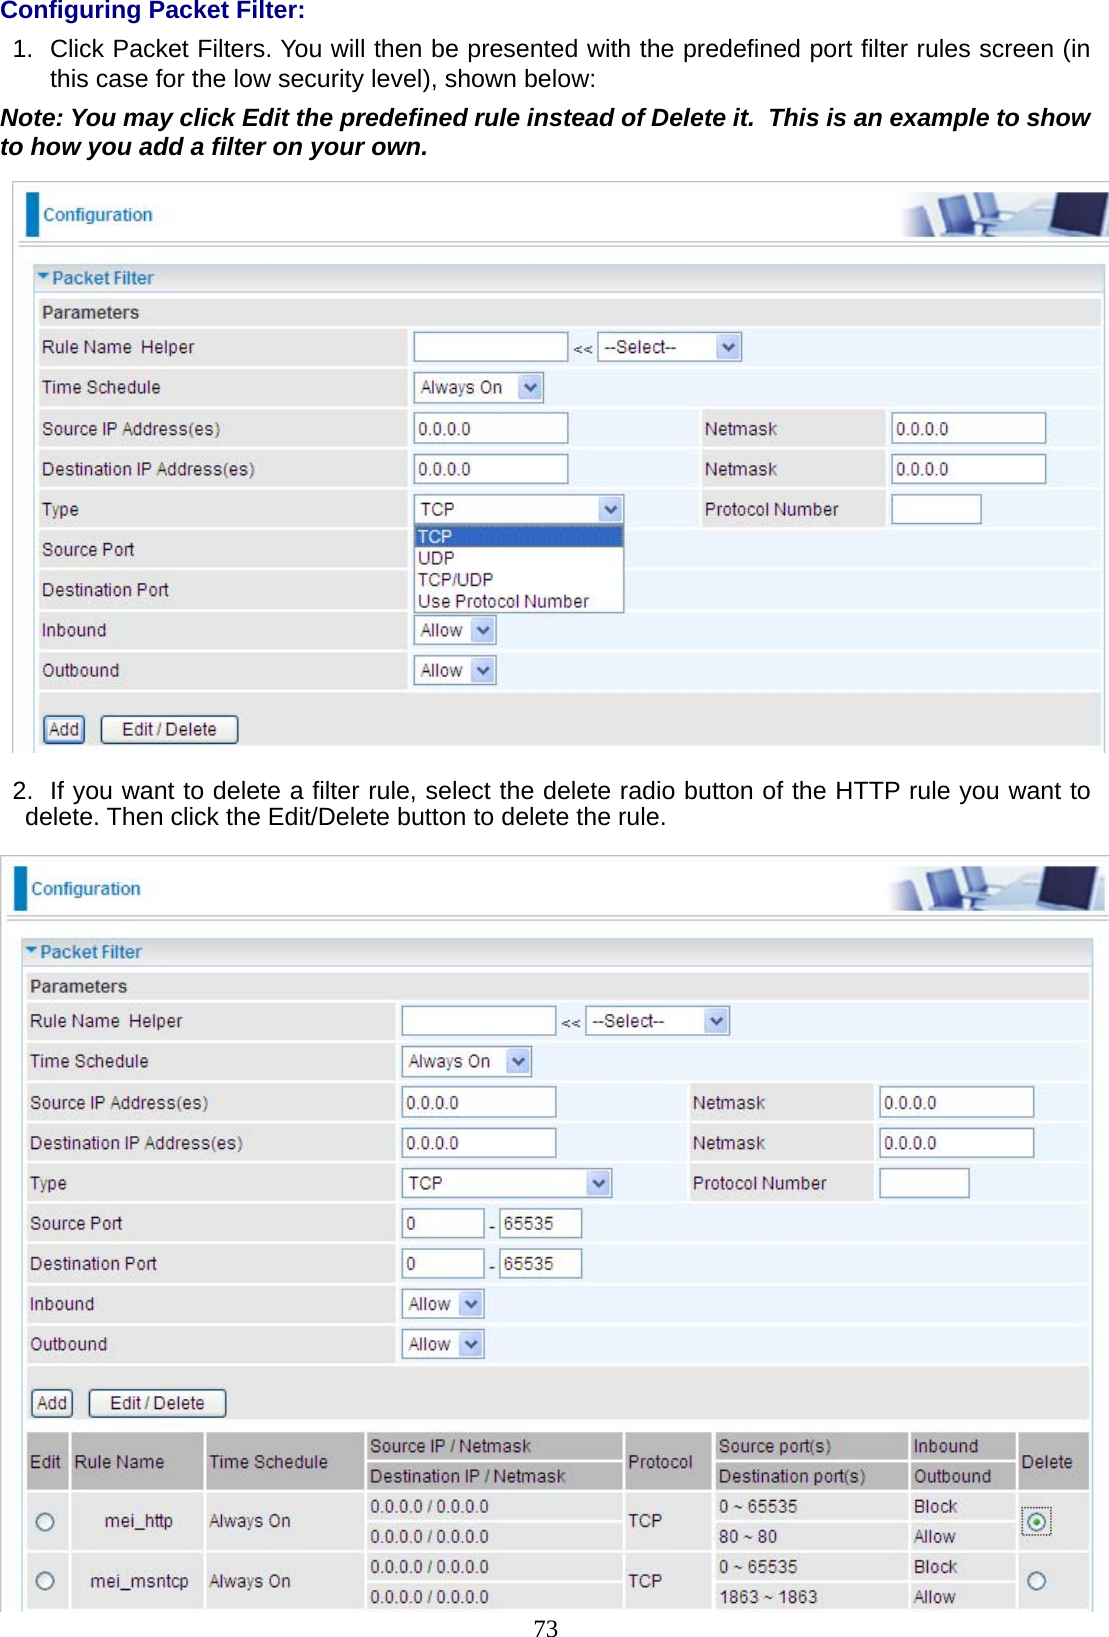 73 Configuring Packet Filter: 1.  Click Packet Filters. You will then be presented with the predefined port filter rules screen (in this case for the low security level), shown below: Note: You may click Edit the predefined rule instead of Delete it.  This is an example to show to how you add a filter on your own.    2.  If you want to delete a filter rule, select the delete radio button of the HTTP rule you want to delete. Then click the Edit/Delete button to delete the rule.   